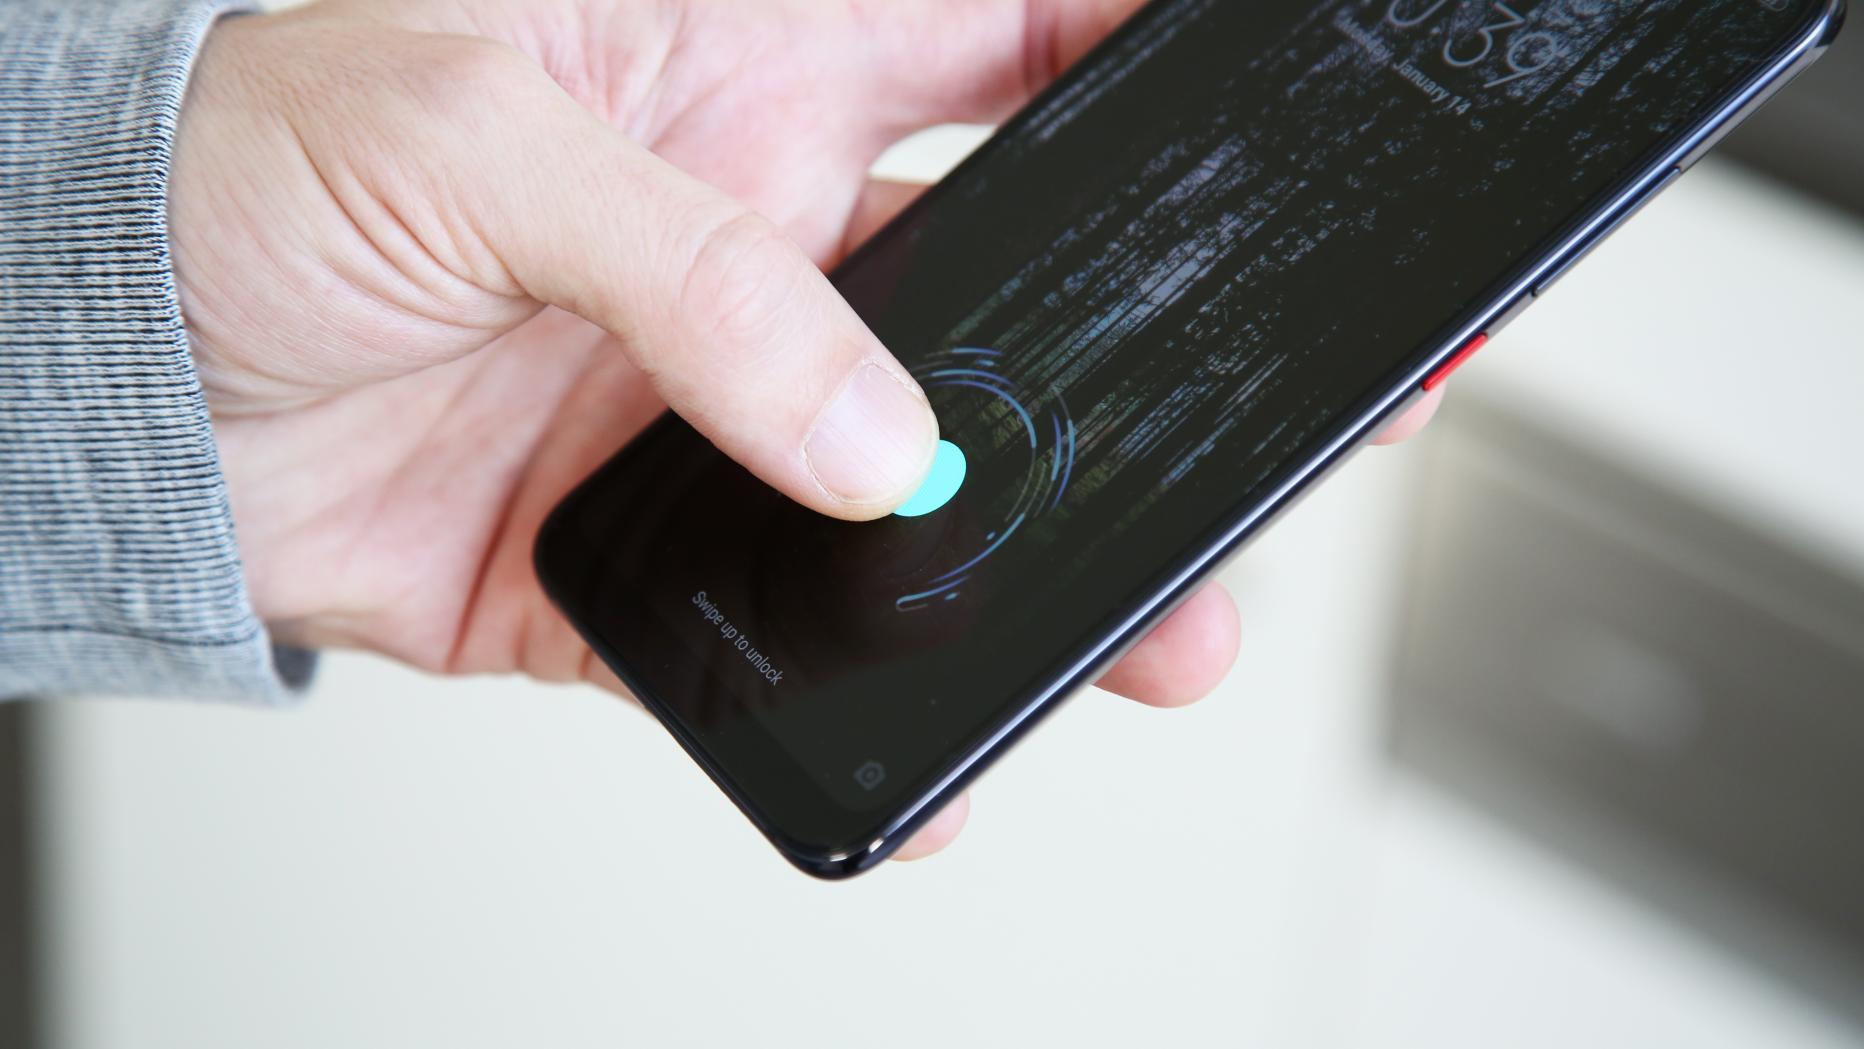 Xiaomi wants to turn the entire cell phone display into a fingerprint scanner thumbnail